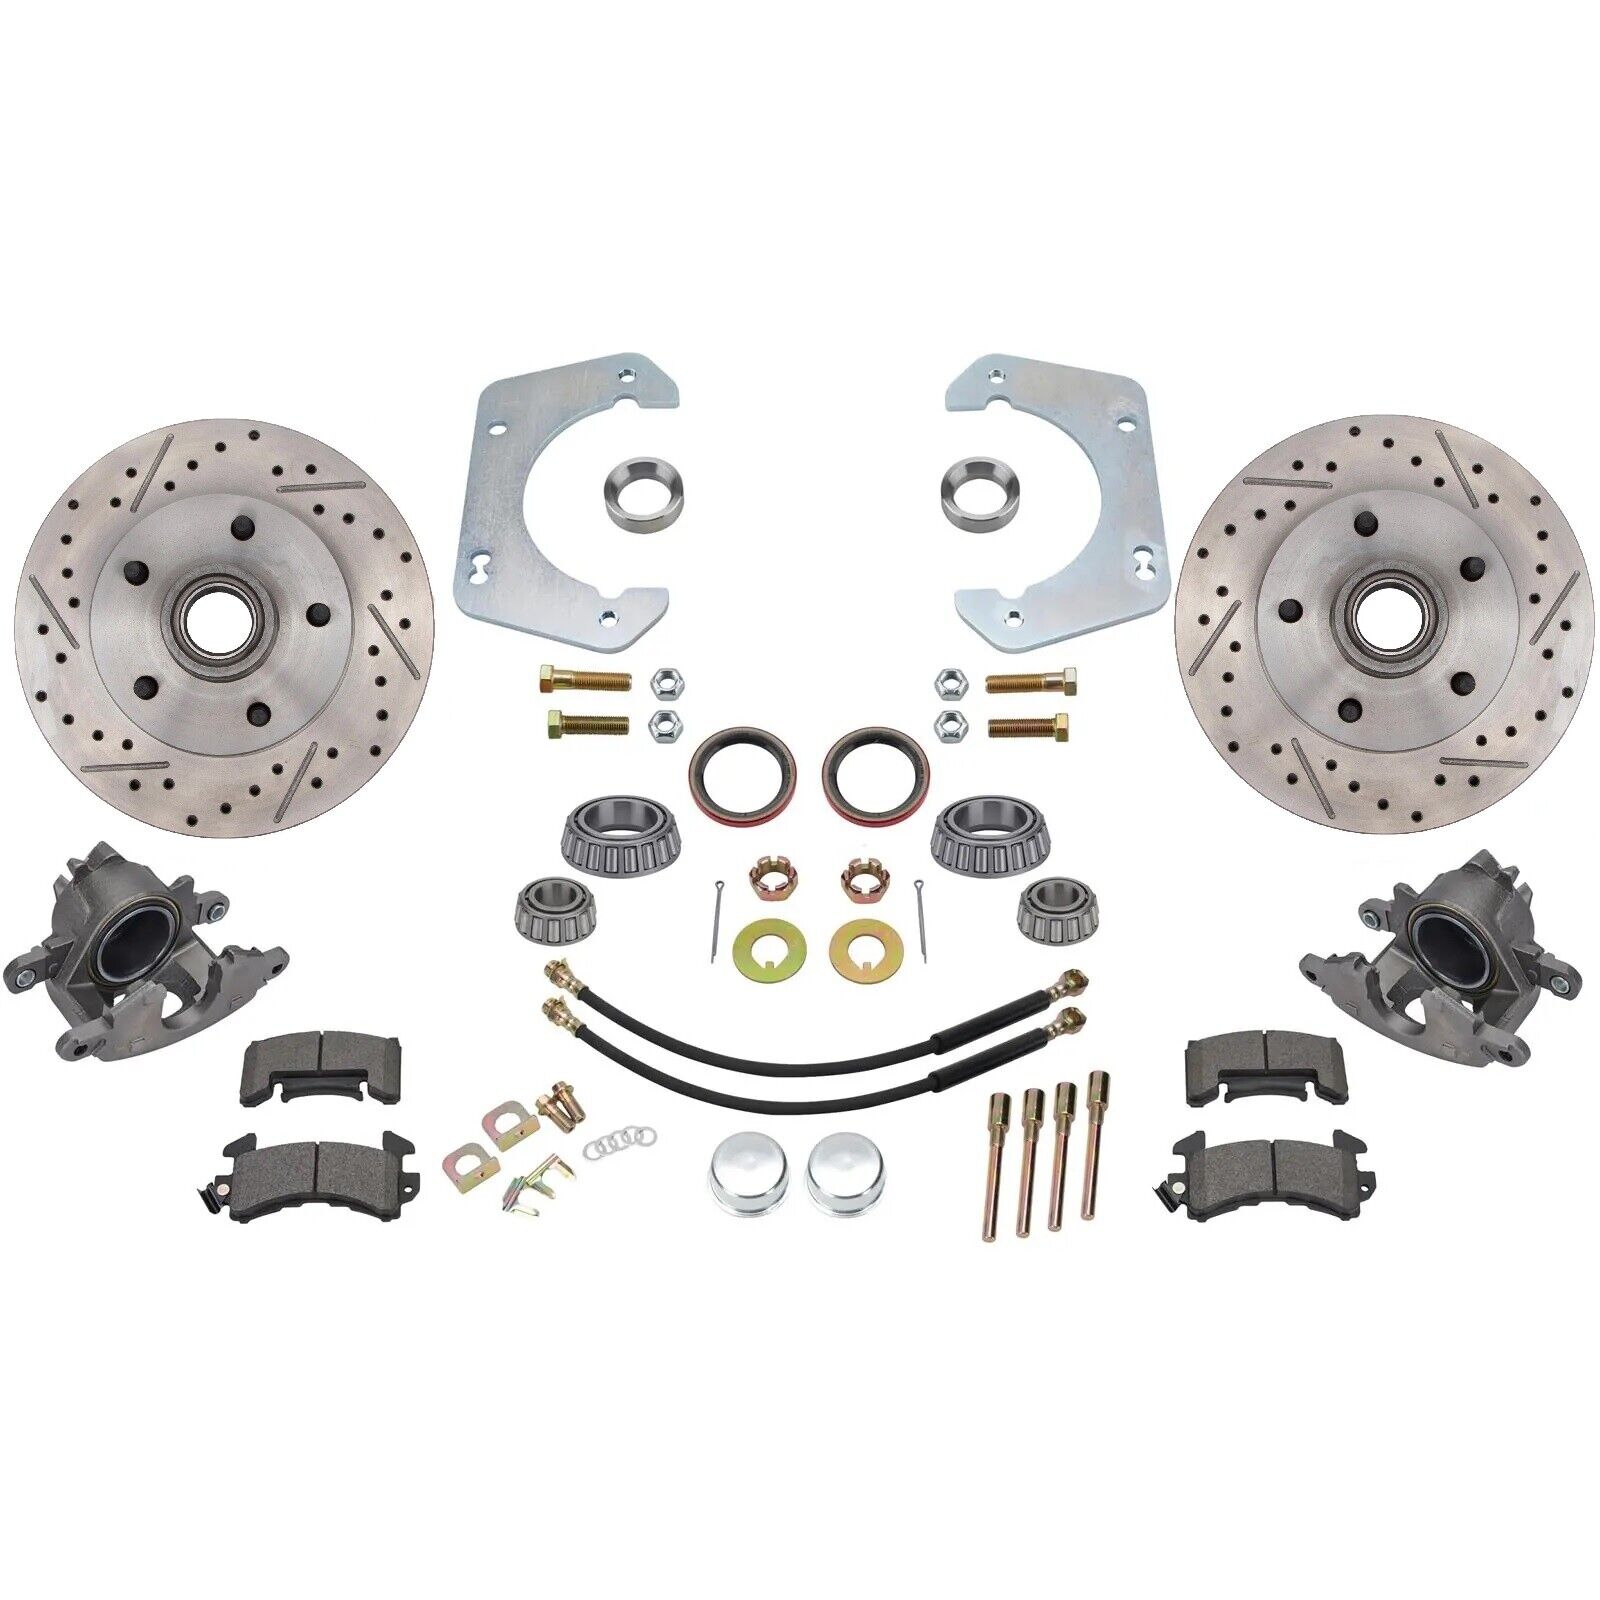 GM Mid-size to 1949-54 Fits Chevy Spindle, Deluxe Kit Drilled/Slotted